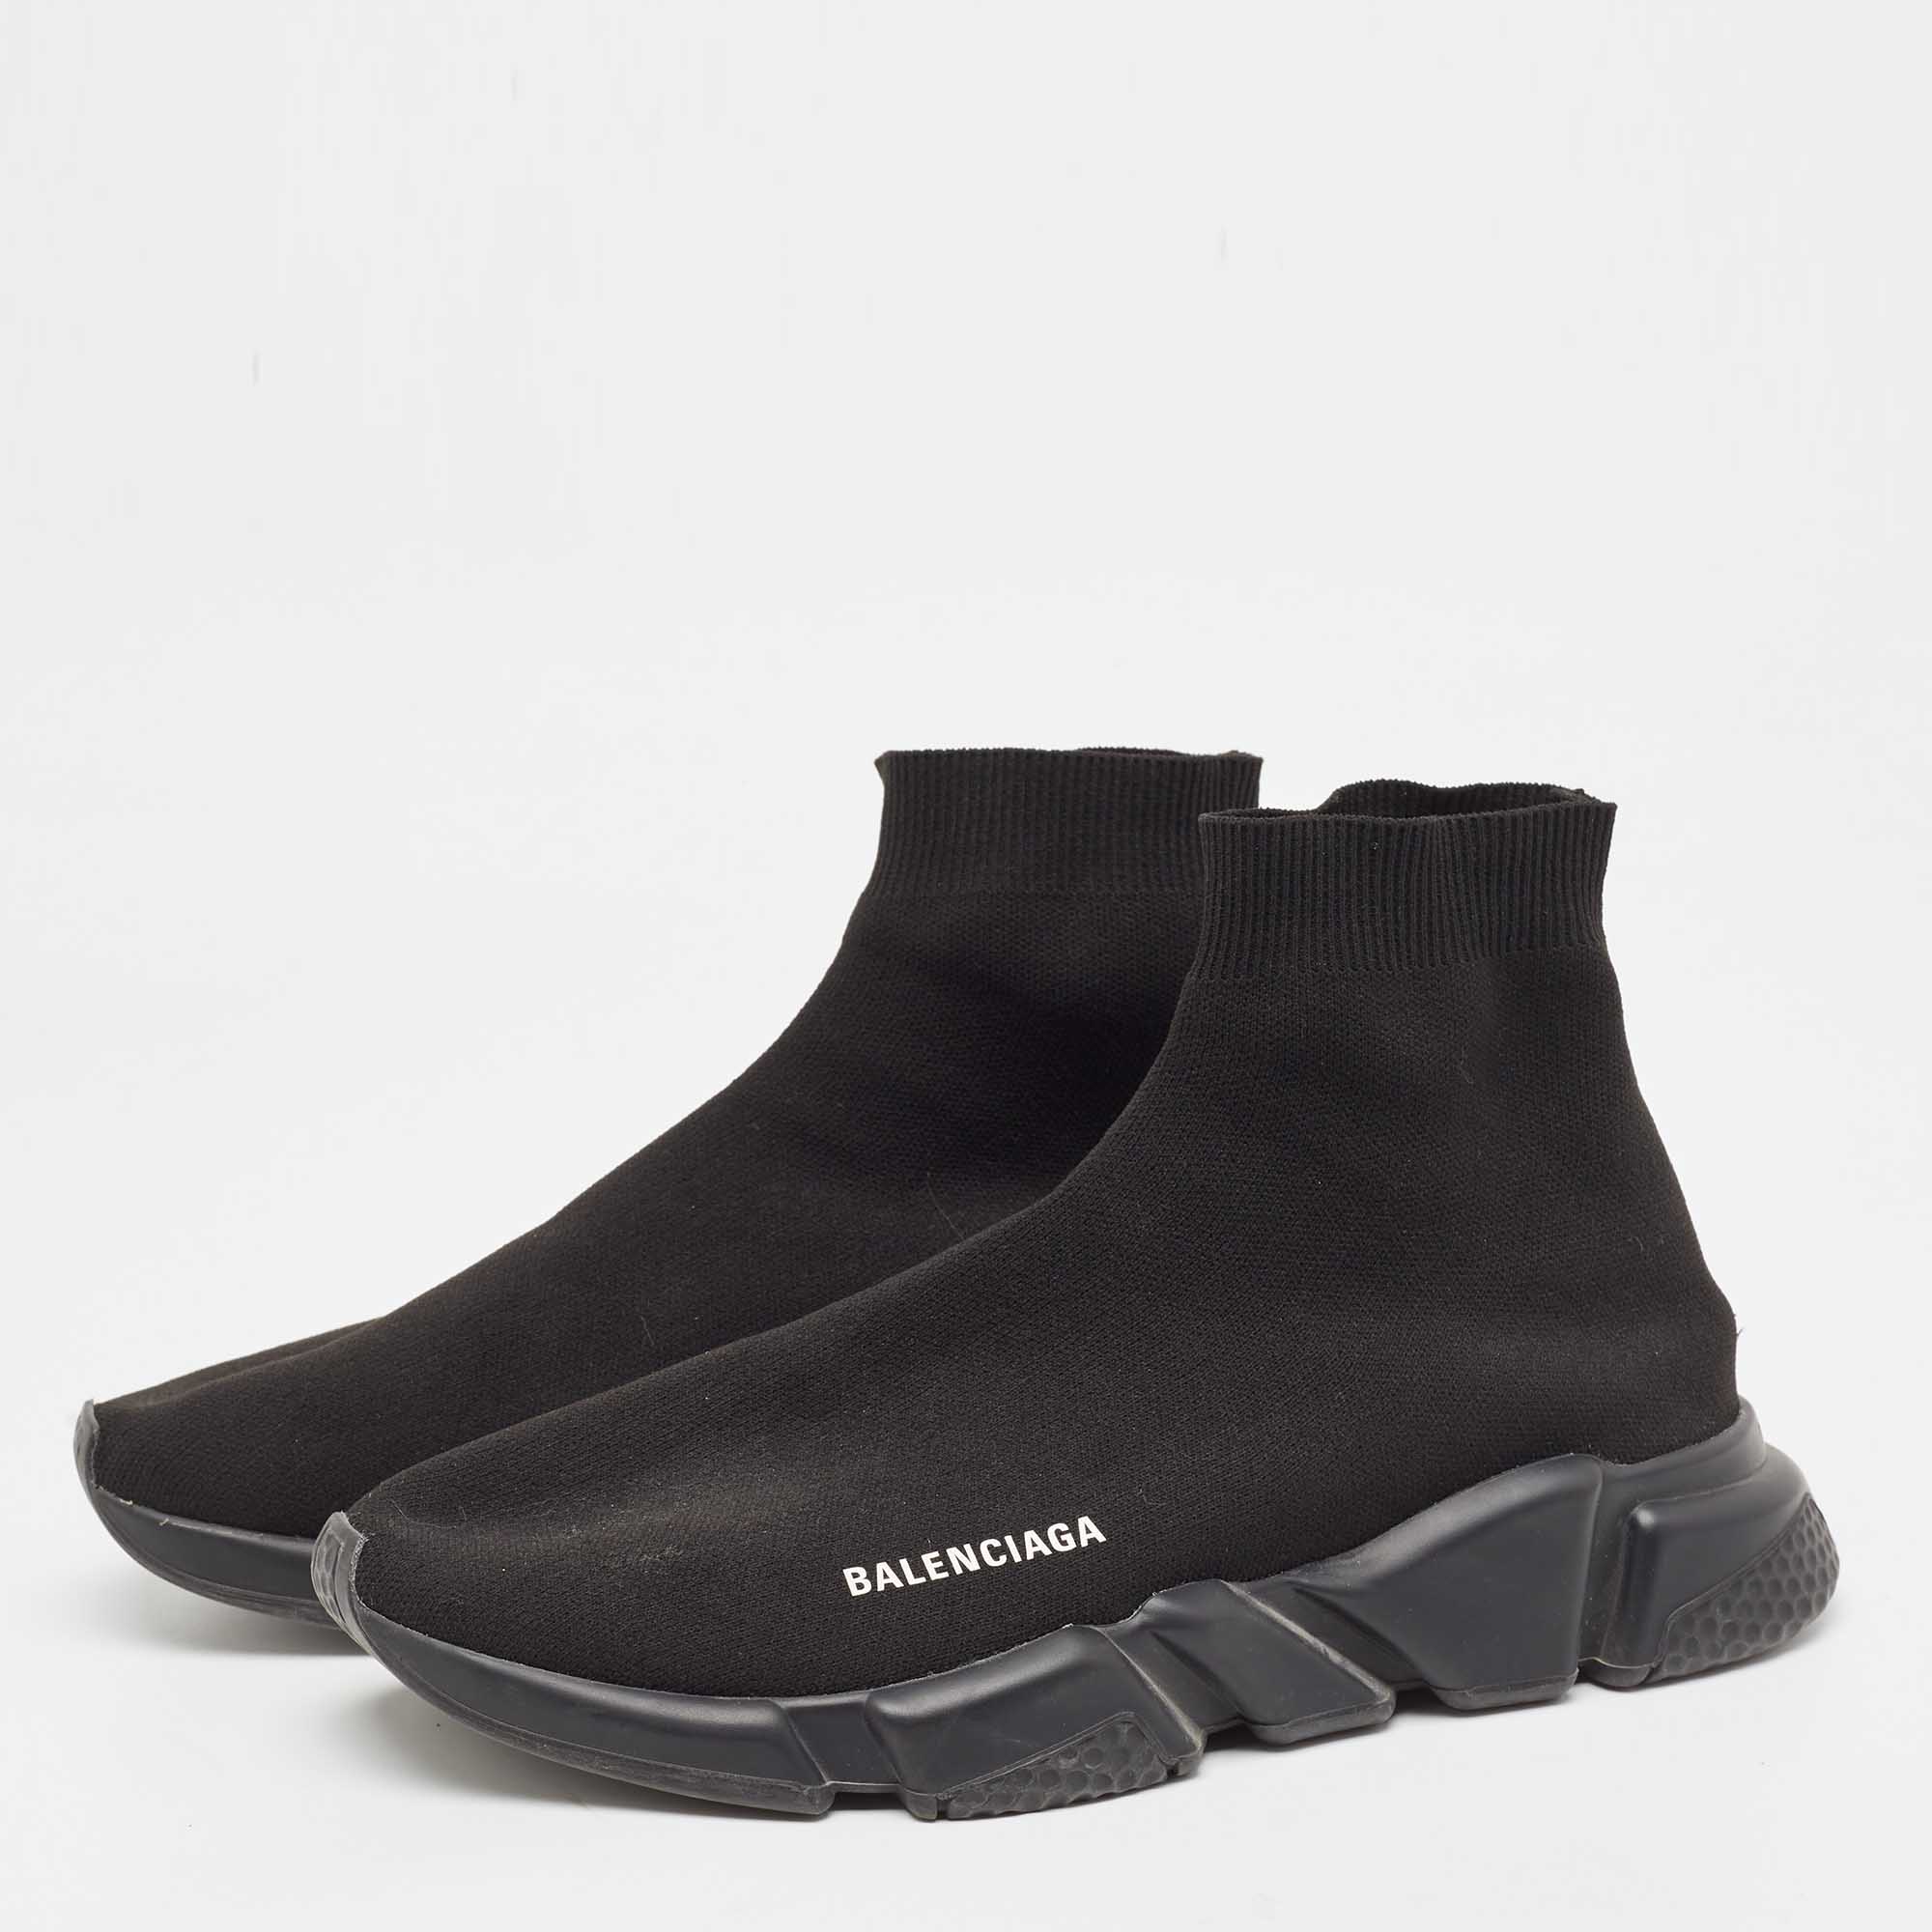 

Balenciaga Black Knit Fabric Speed Trainer High Top Sneakers Size